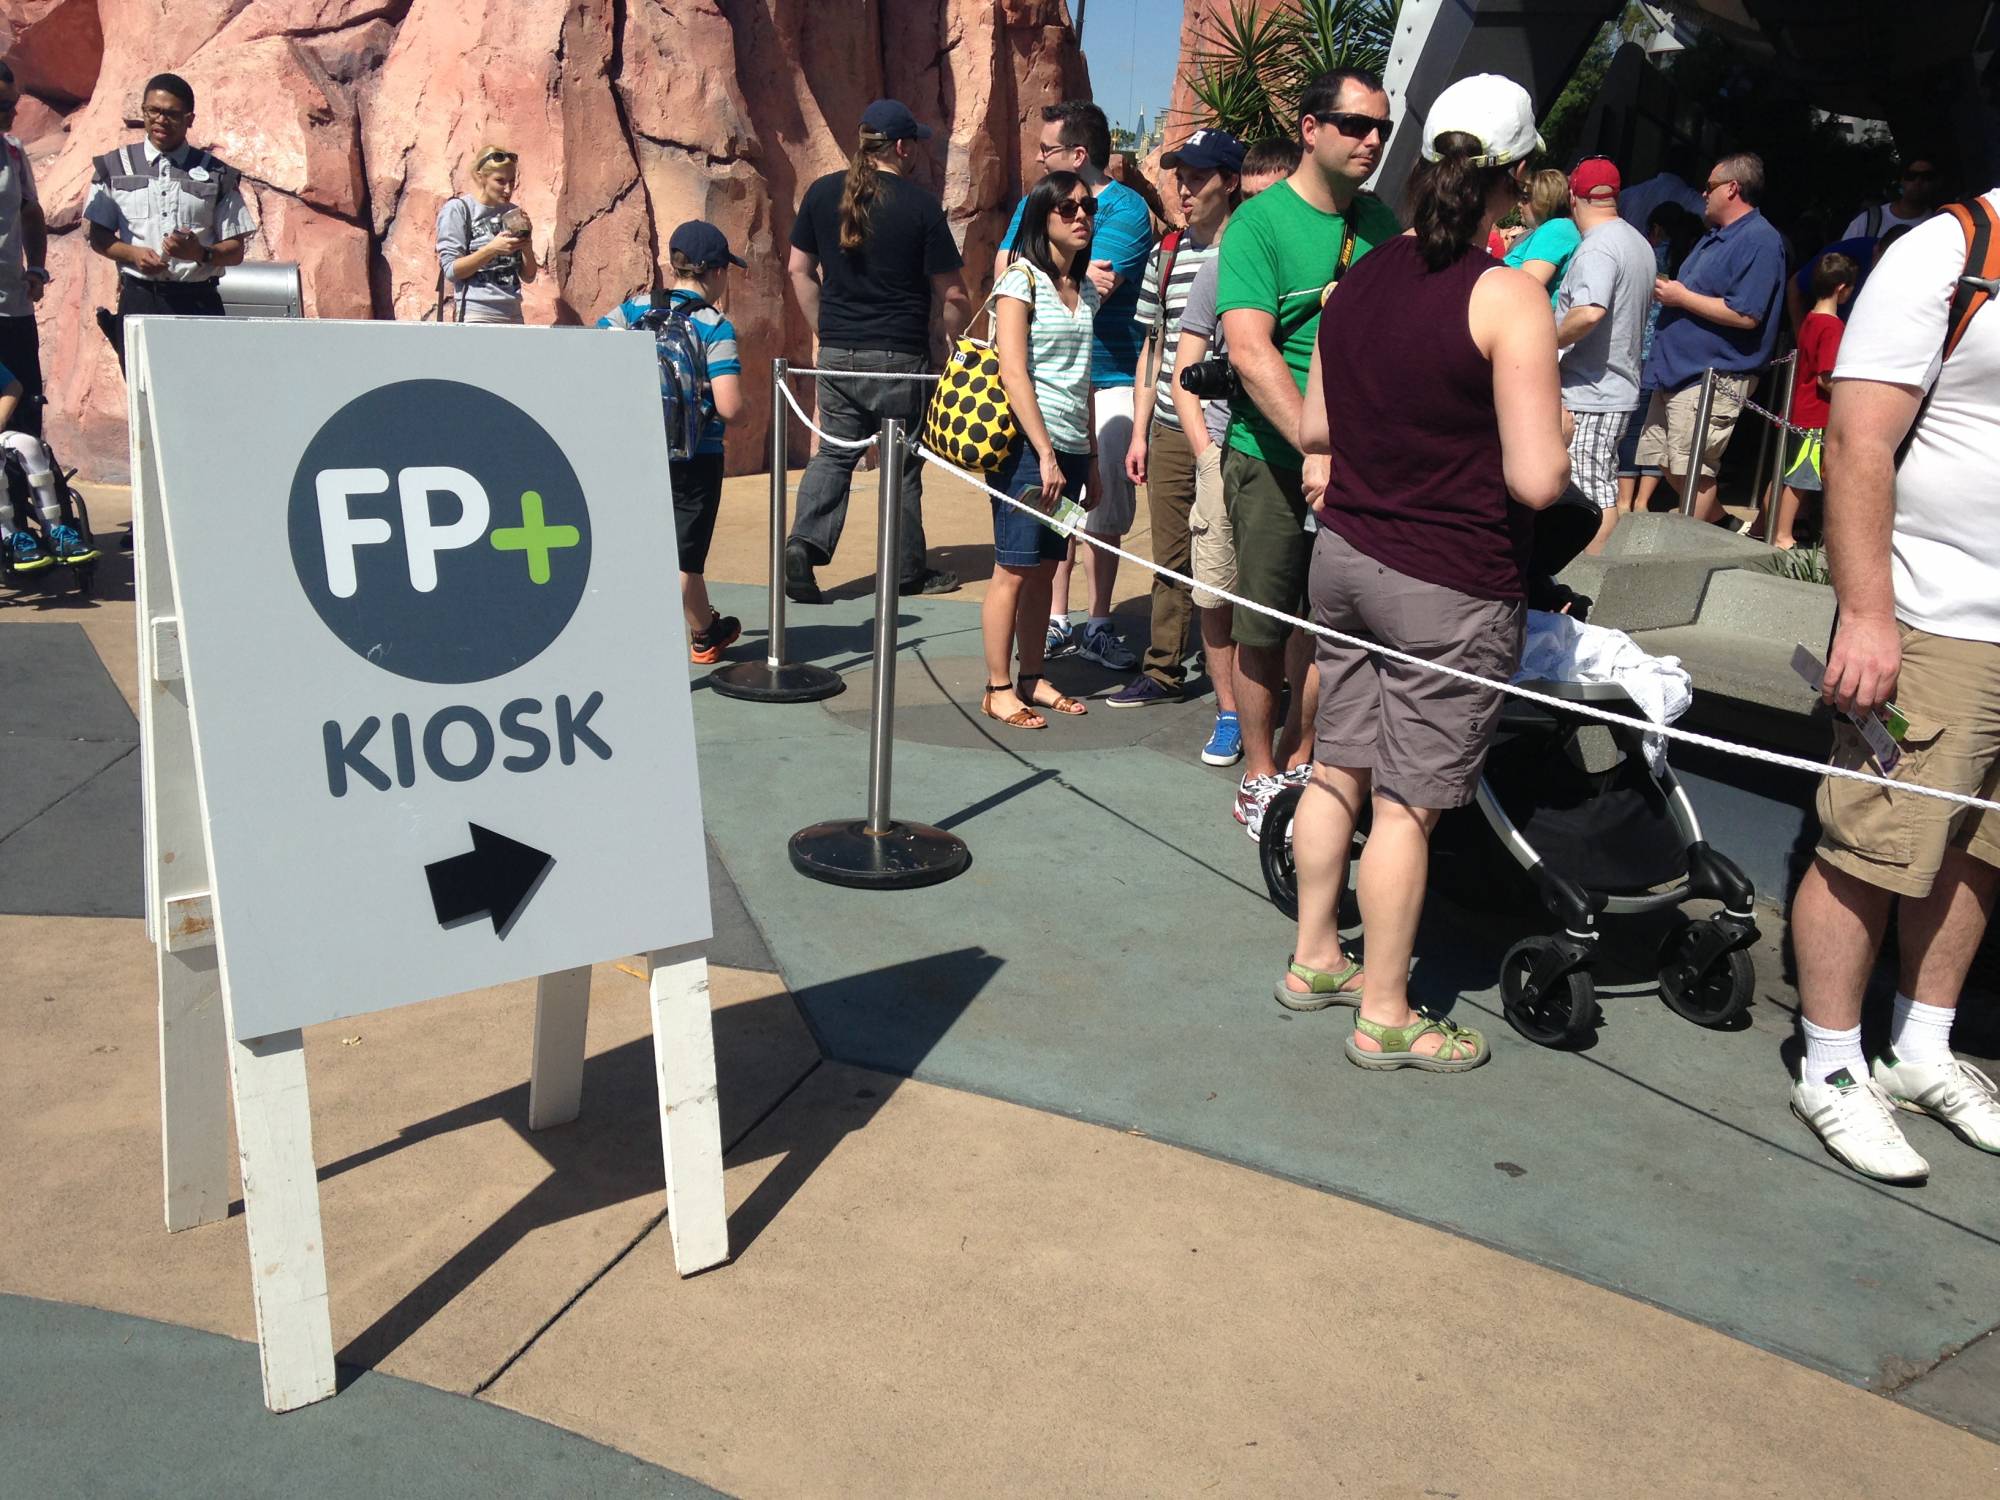 Find out how you can get more FastPasses per day at Walt Disney World. Great tips! |PassPorter.com